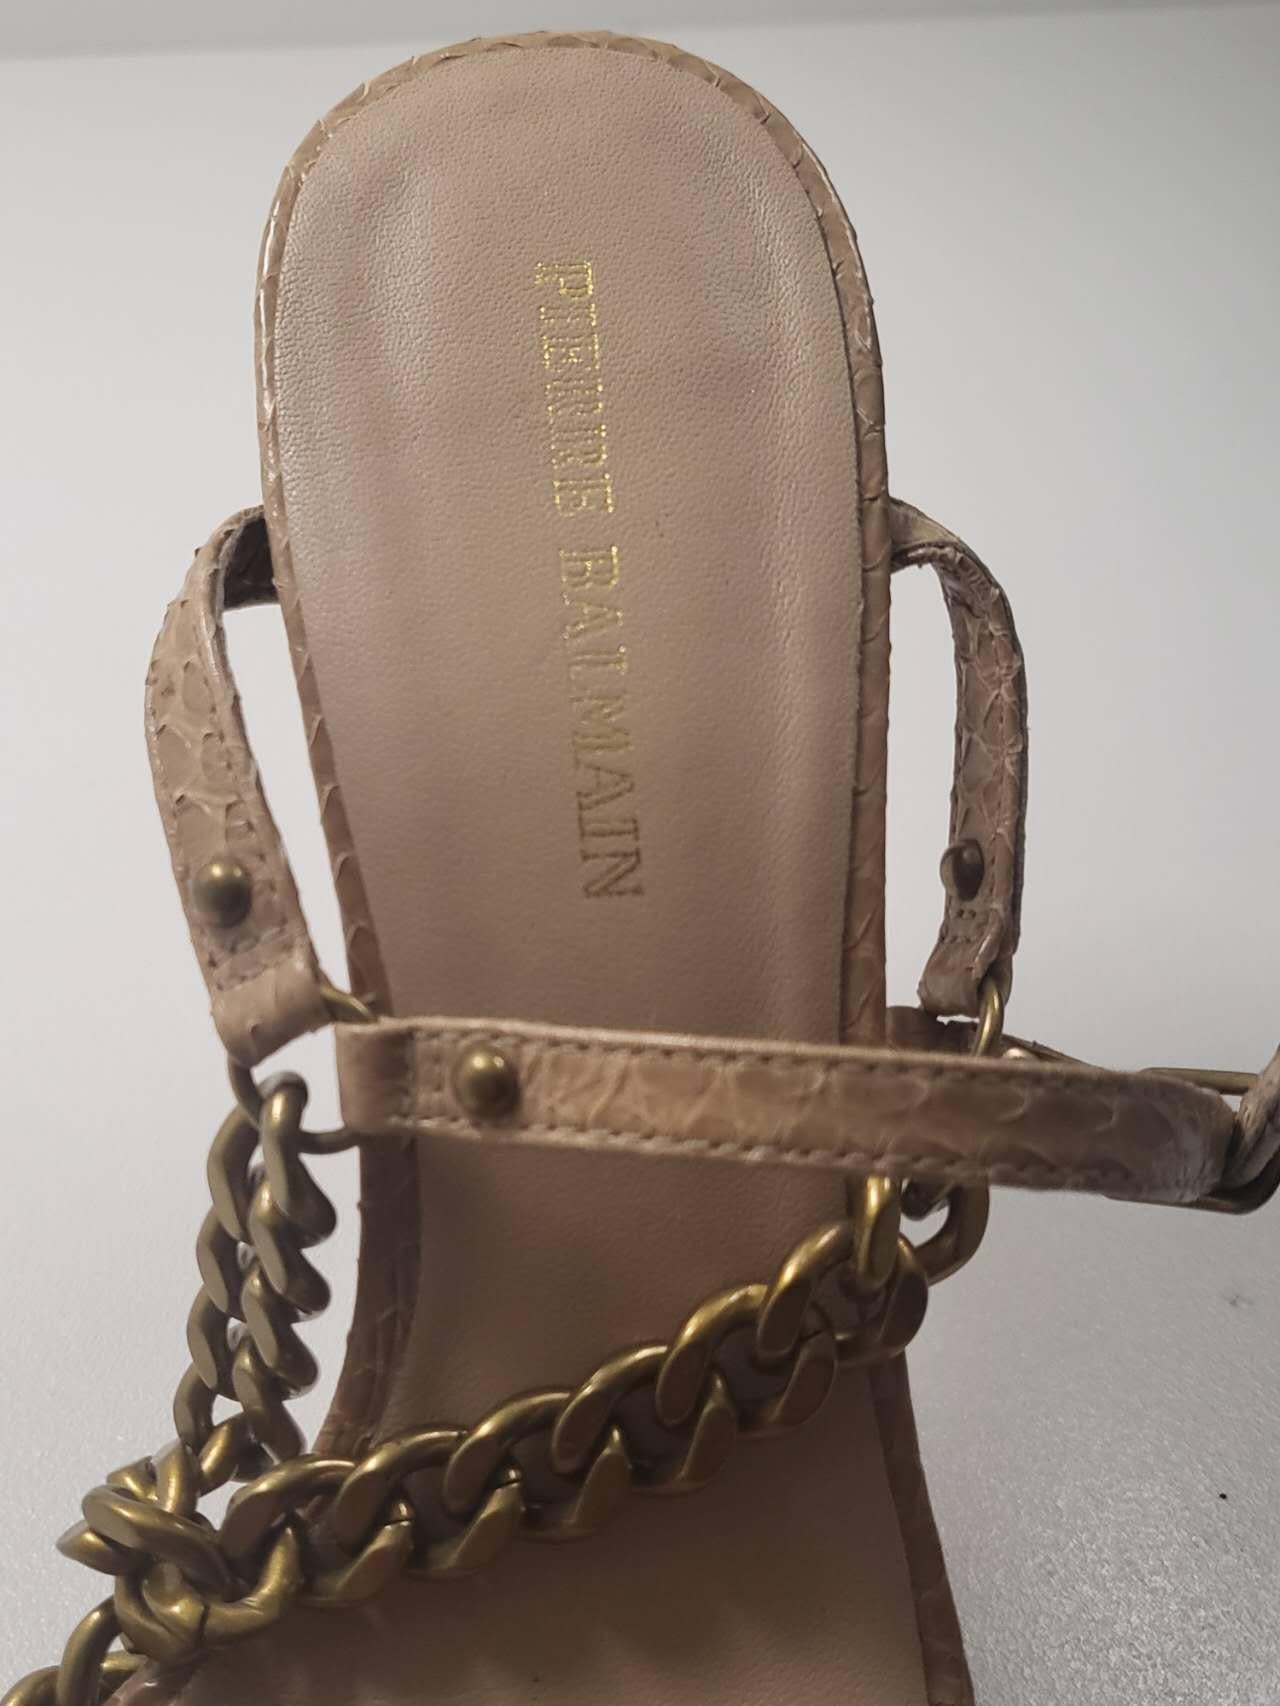 Introducing the epitome of sophistication and style: the Pierre Balmain Snakeskin Leather Beige Nude High Heel Mule Sandals in size 36. Elevate your ensemble with these luxurious mule sandals, crafted from premium snakeskin leather in a subtle and